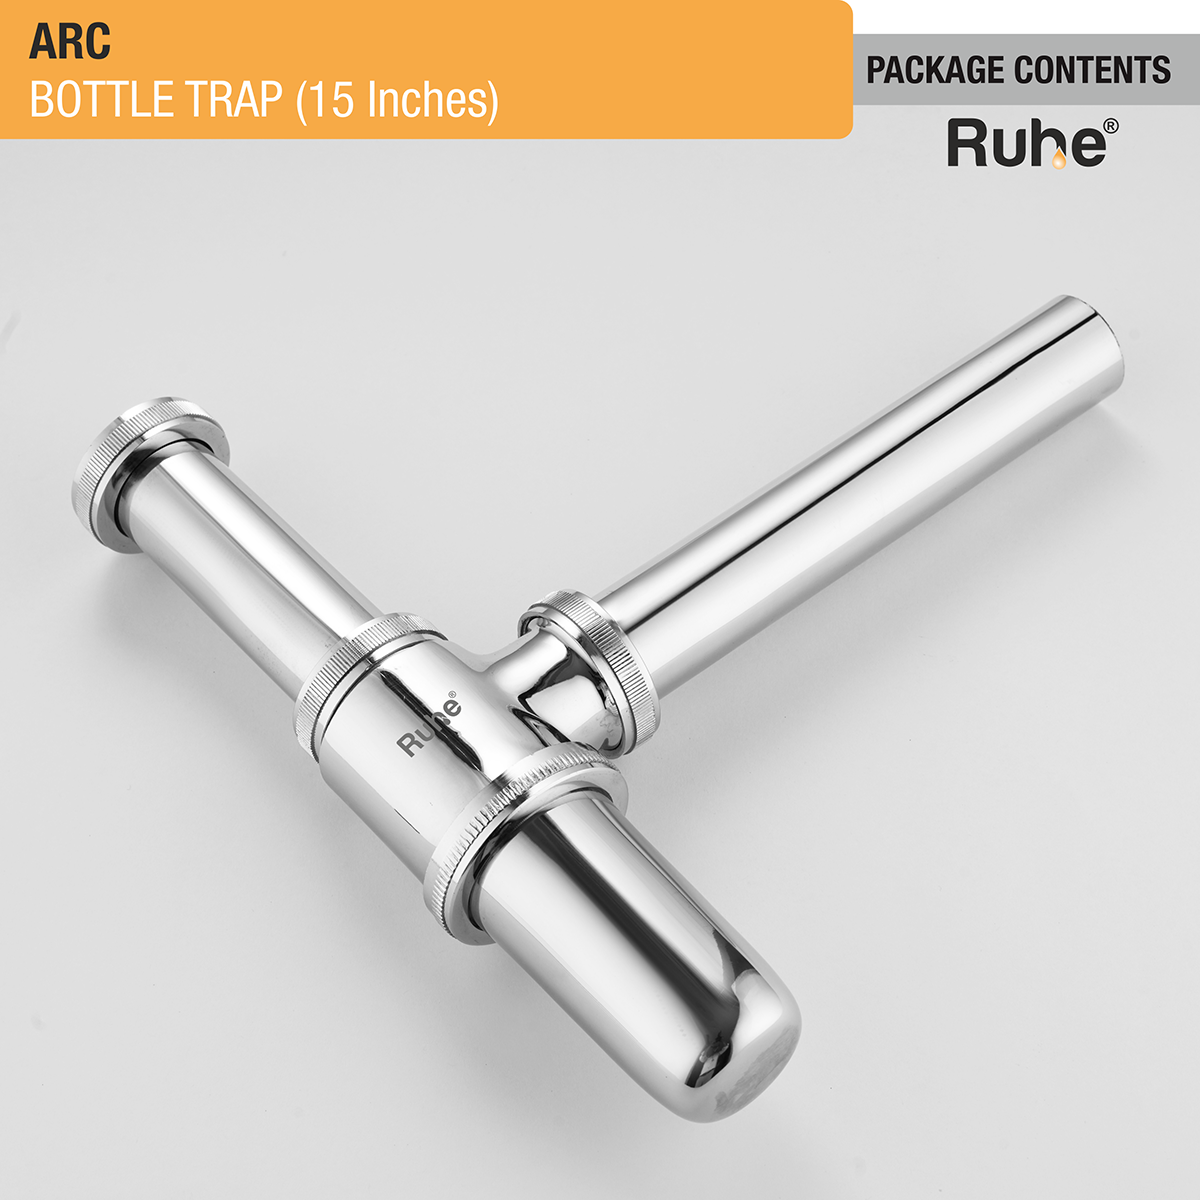 ARC Bottle Trap (15 inches) package content